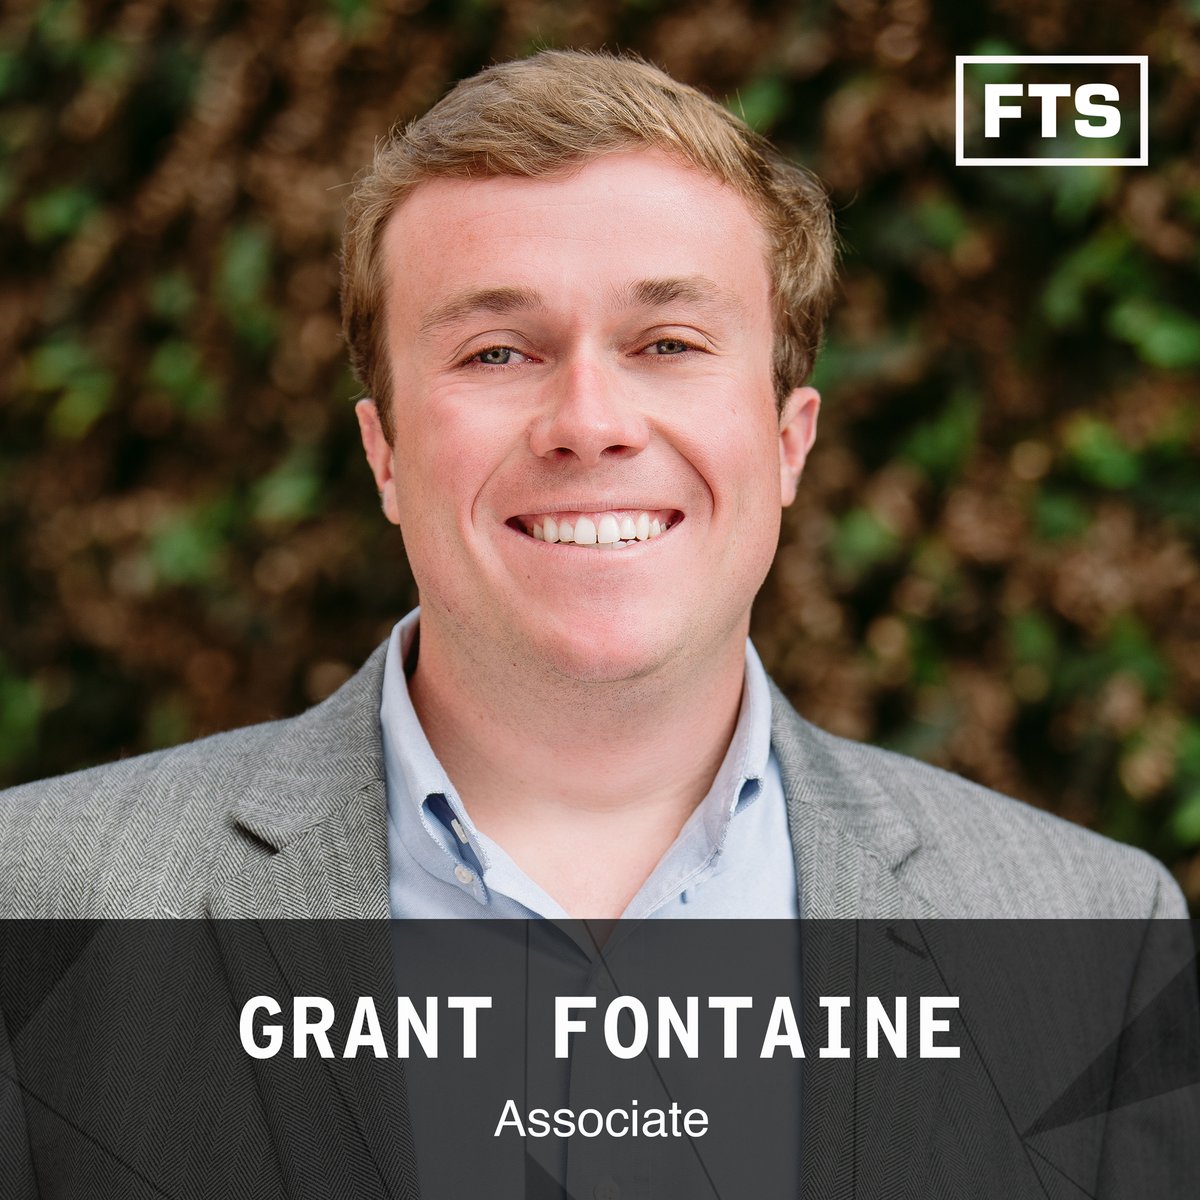 Join us in welcoming Grant Fontaine to the FTS team as an Associate! Welcome, Grant!